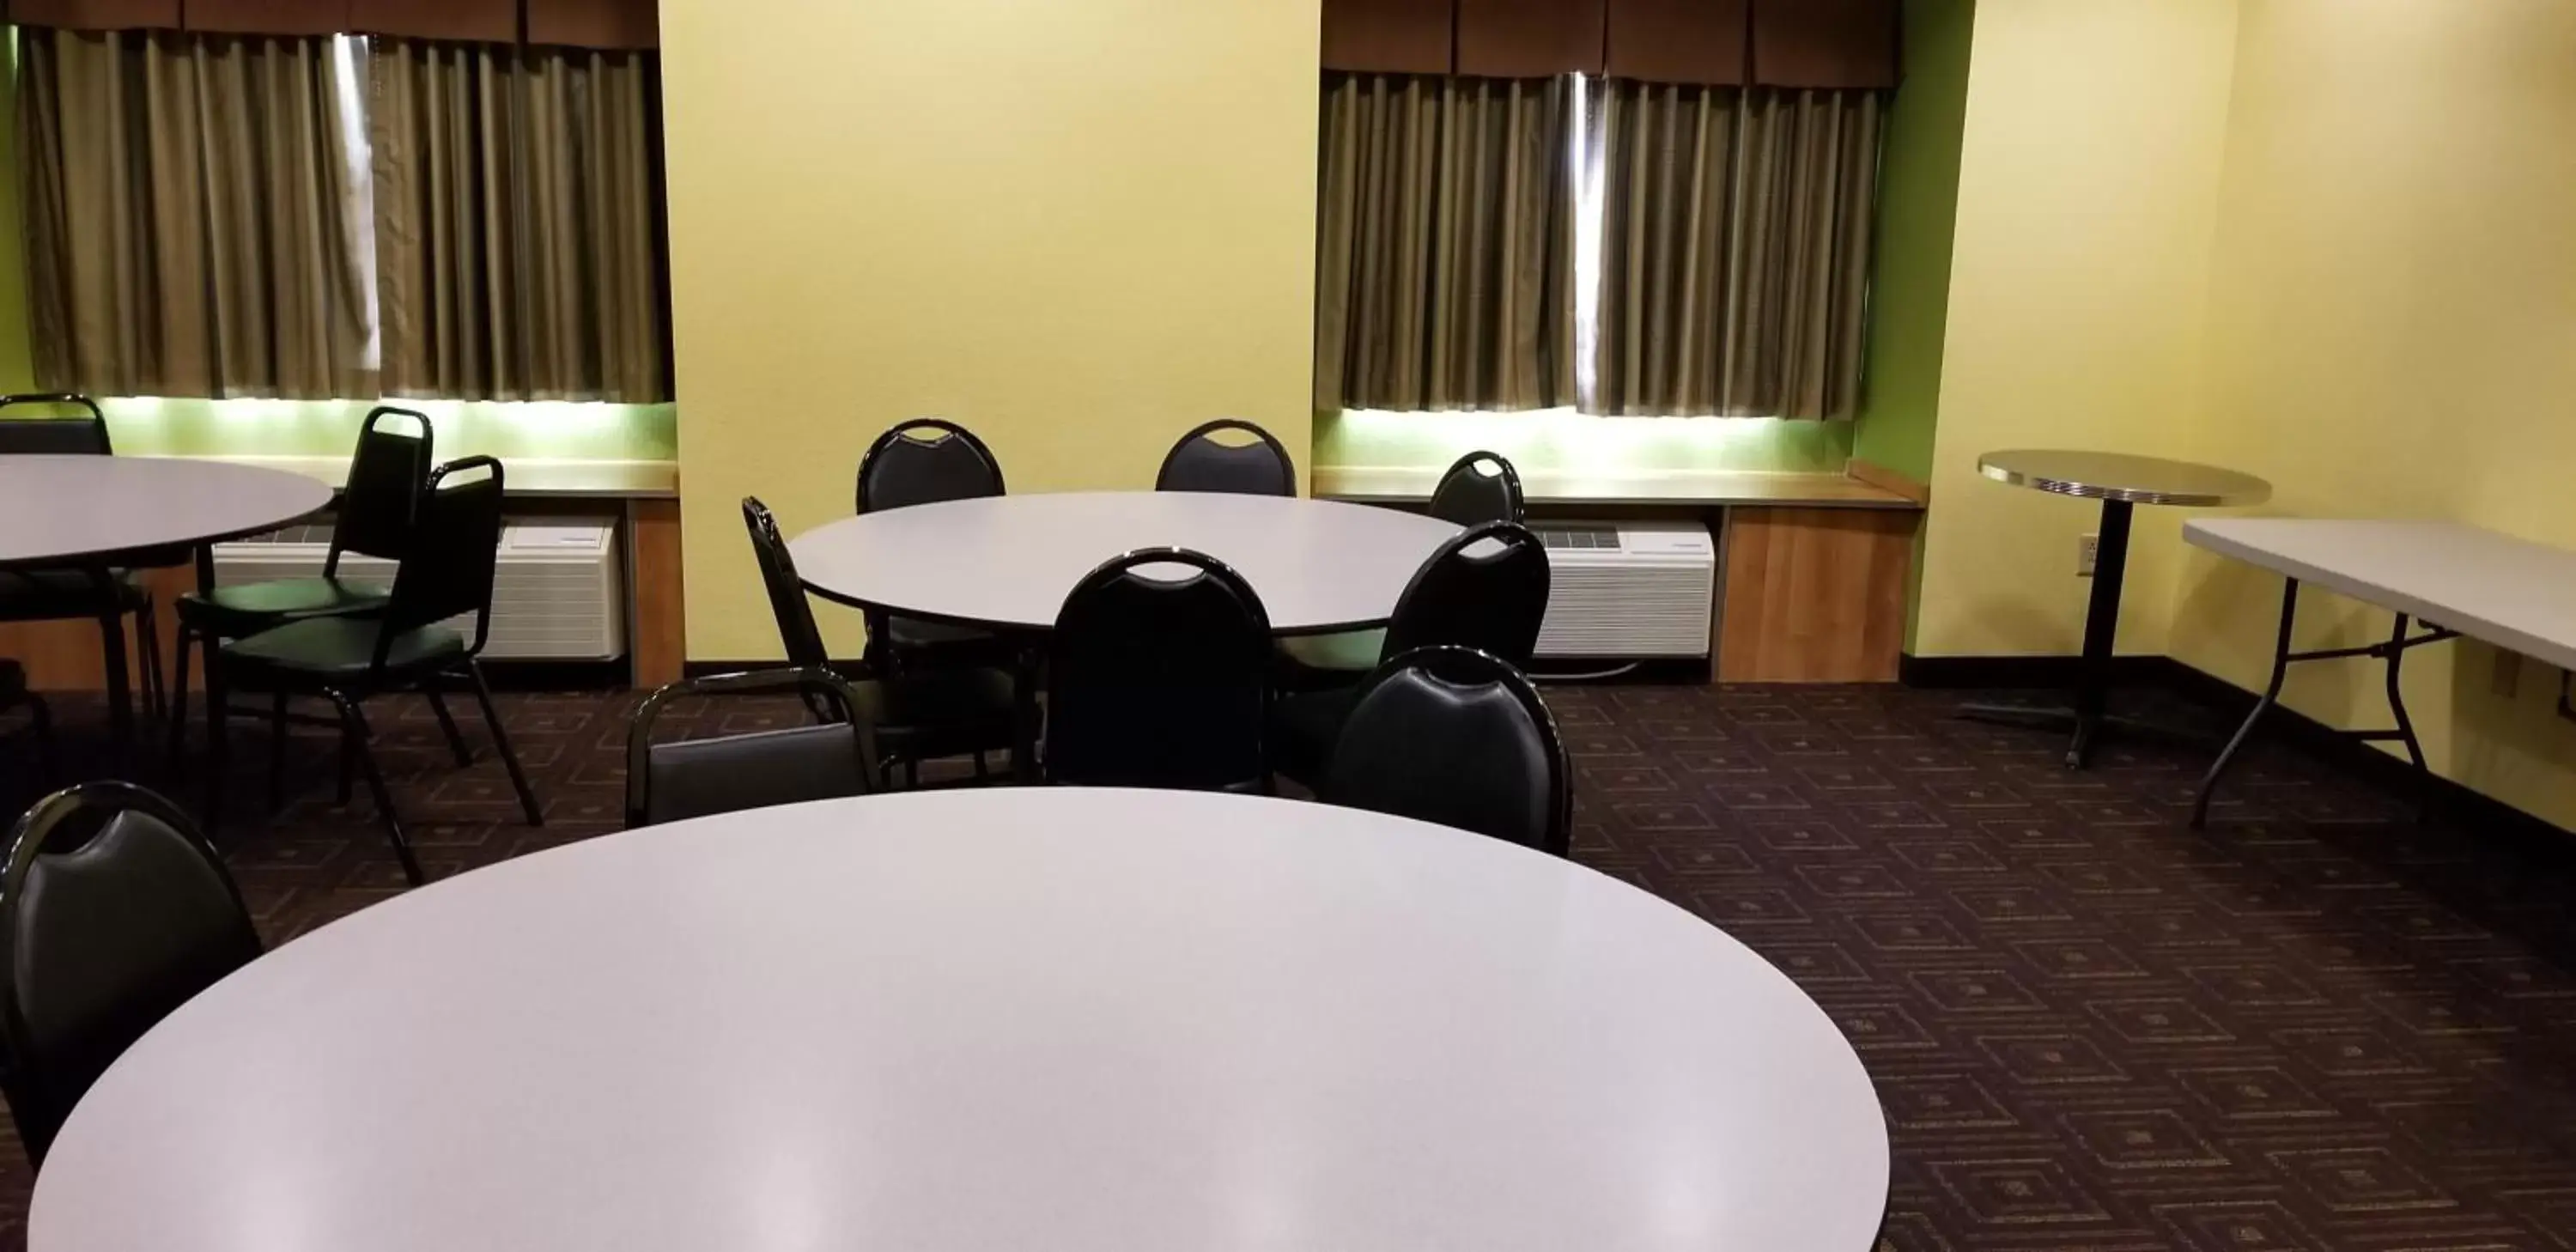 Meeting/conference room in Microtel Inn & Suites by Wyndham Delphos